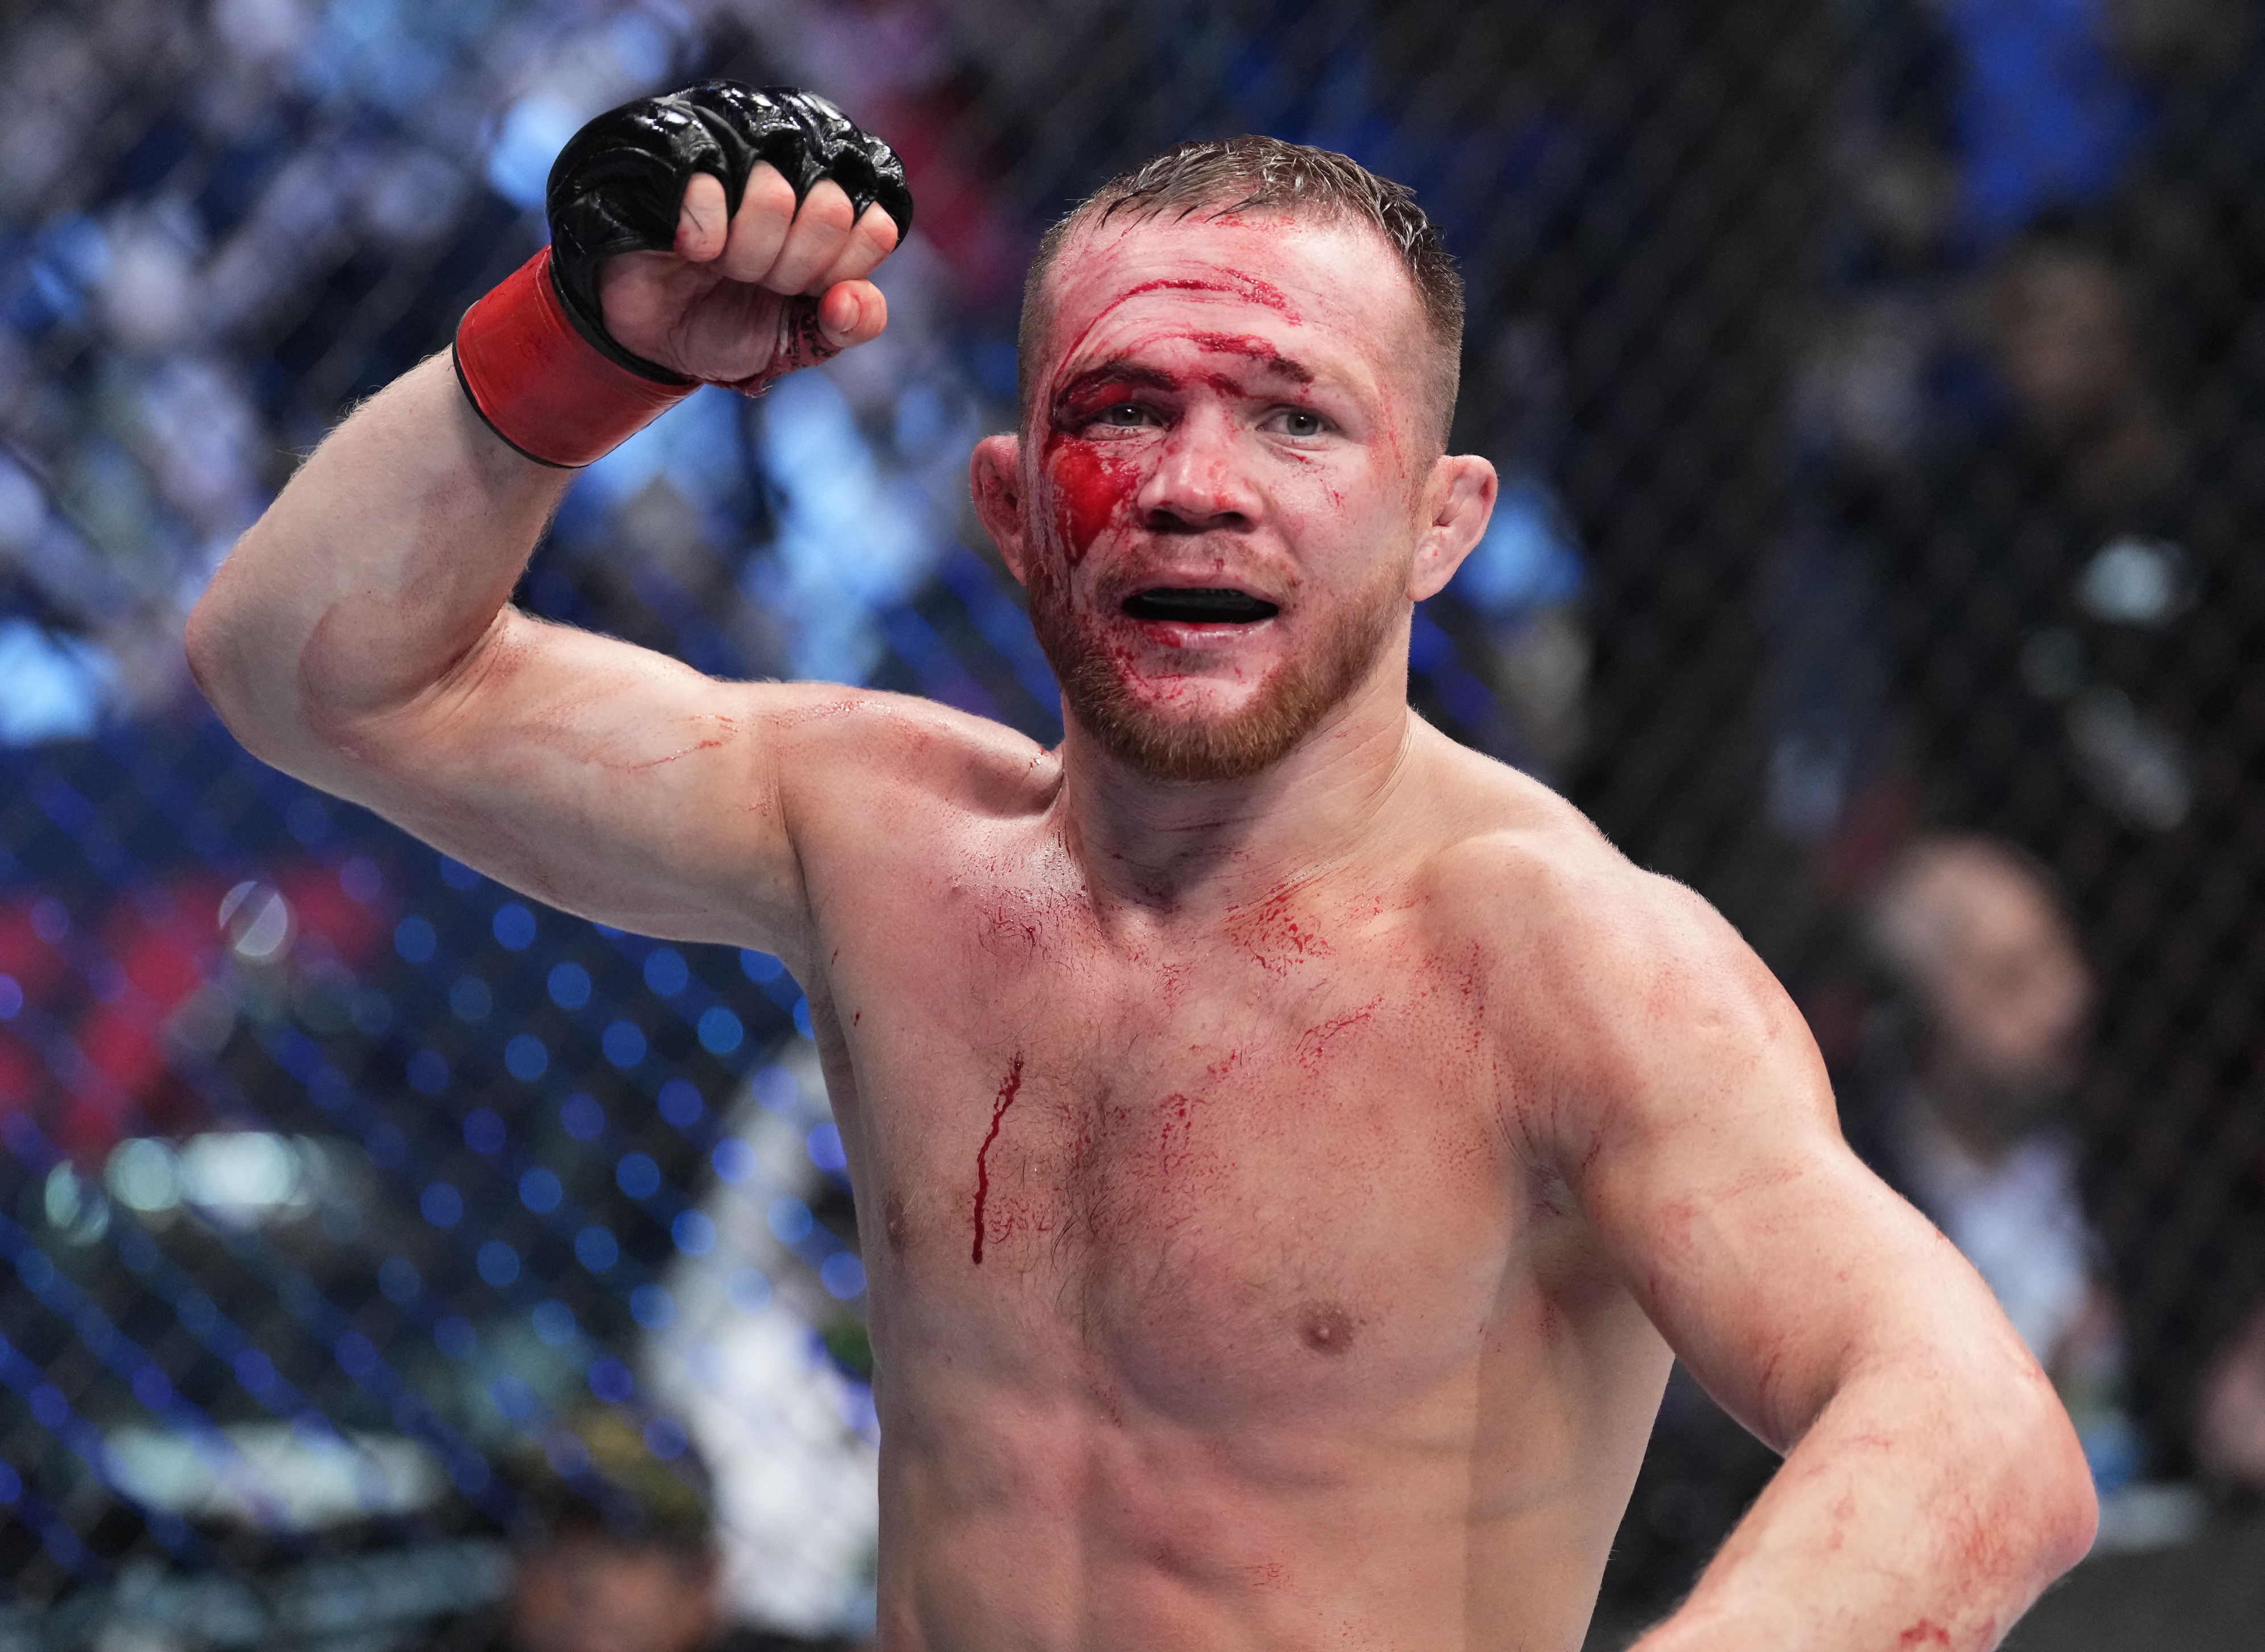 Petr Yan vs. Merab Dvalishvili is targeted to headline a UFC Fight Night card on March 11, 2023